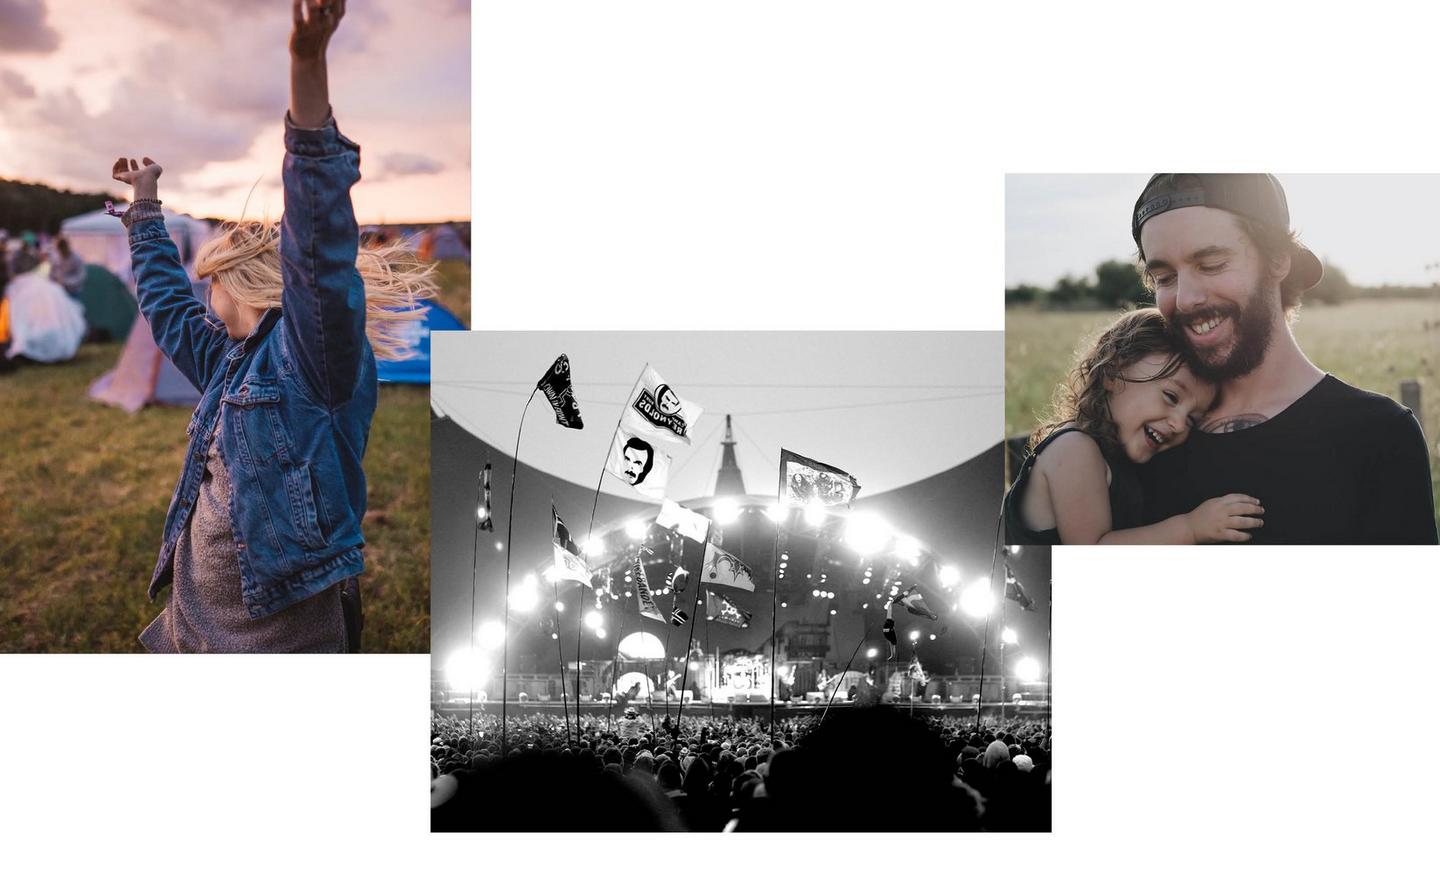 Images of young people and families enjoying music festivals in summertime